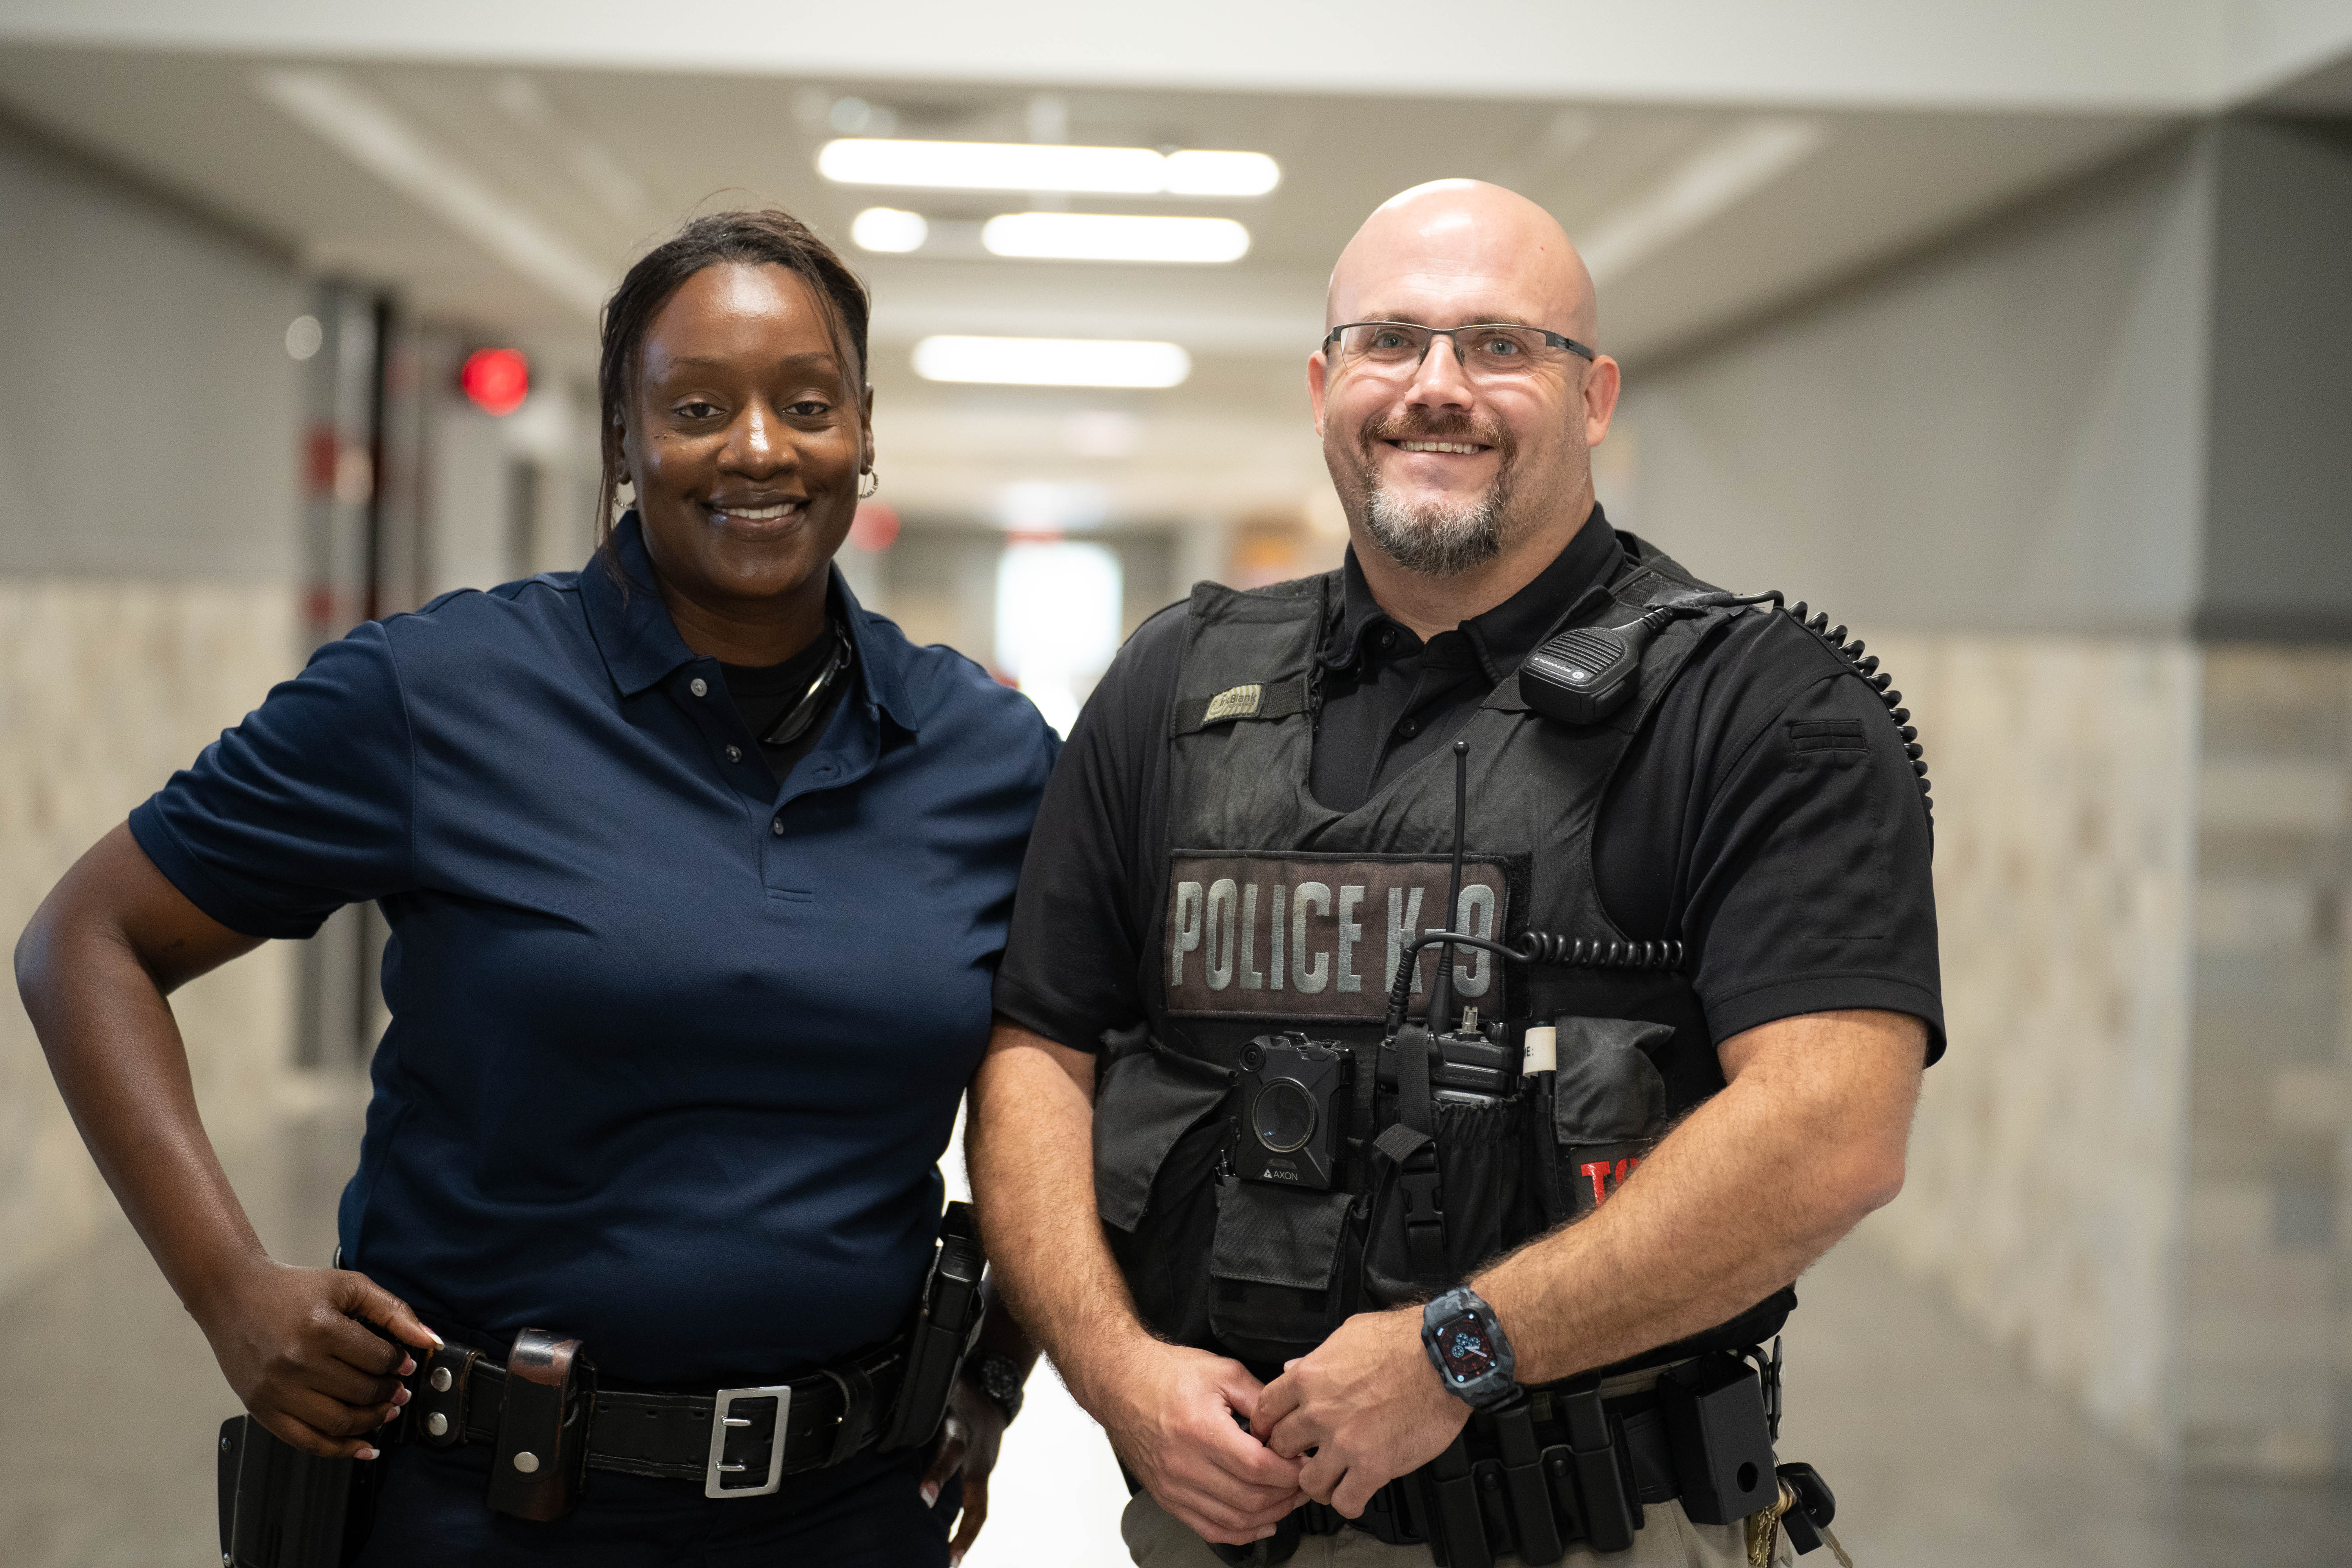 man and woman police officers in uniform standing in school hallway